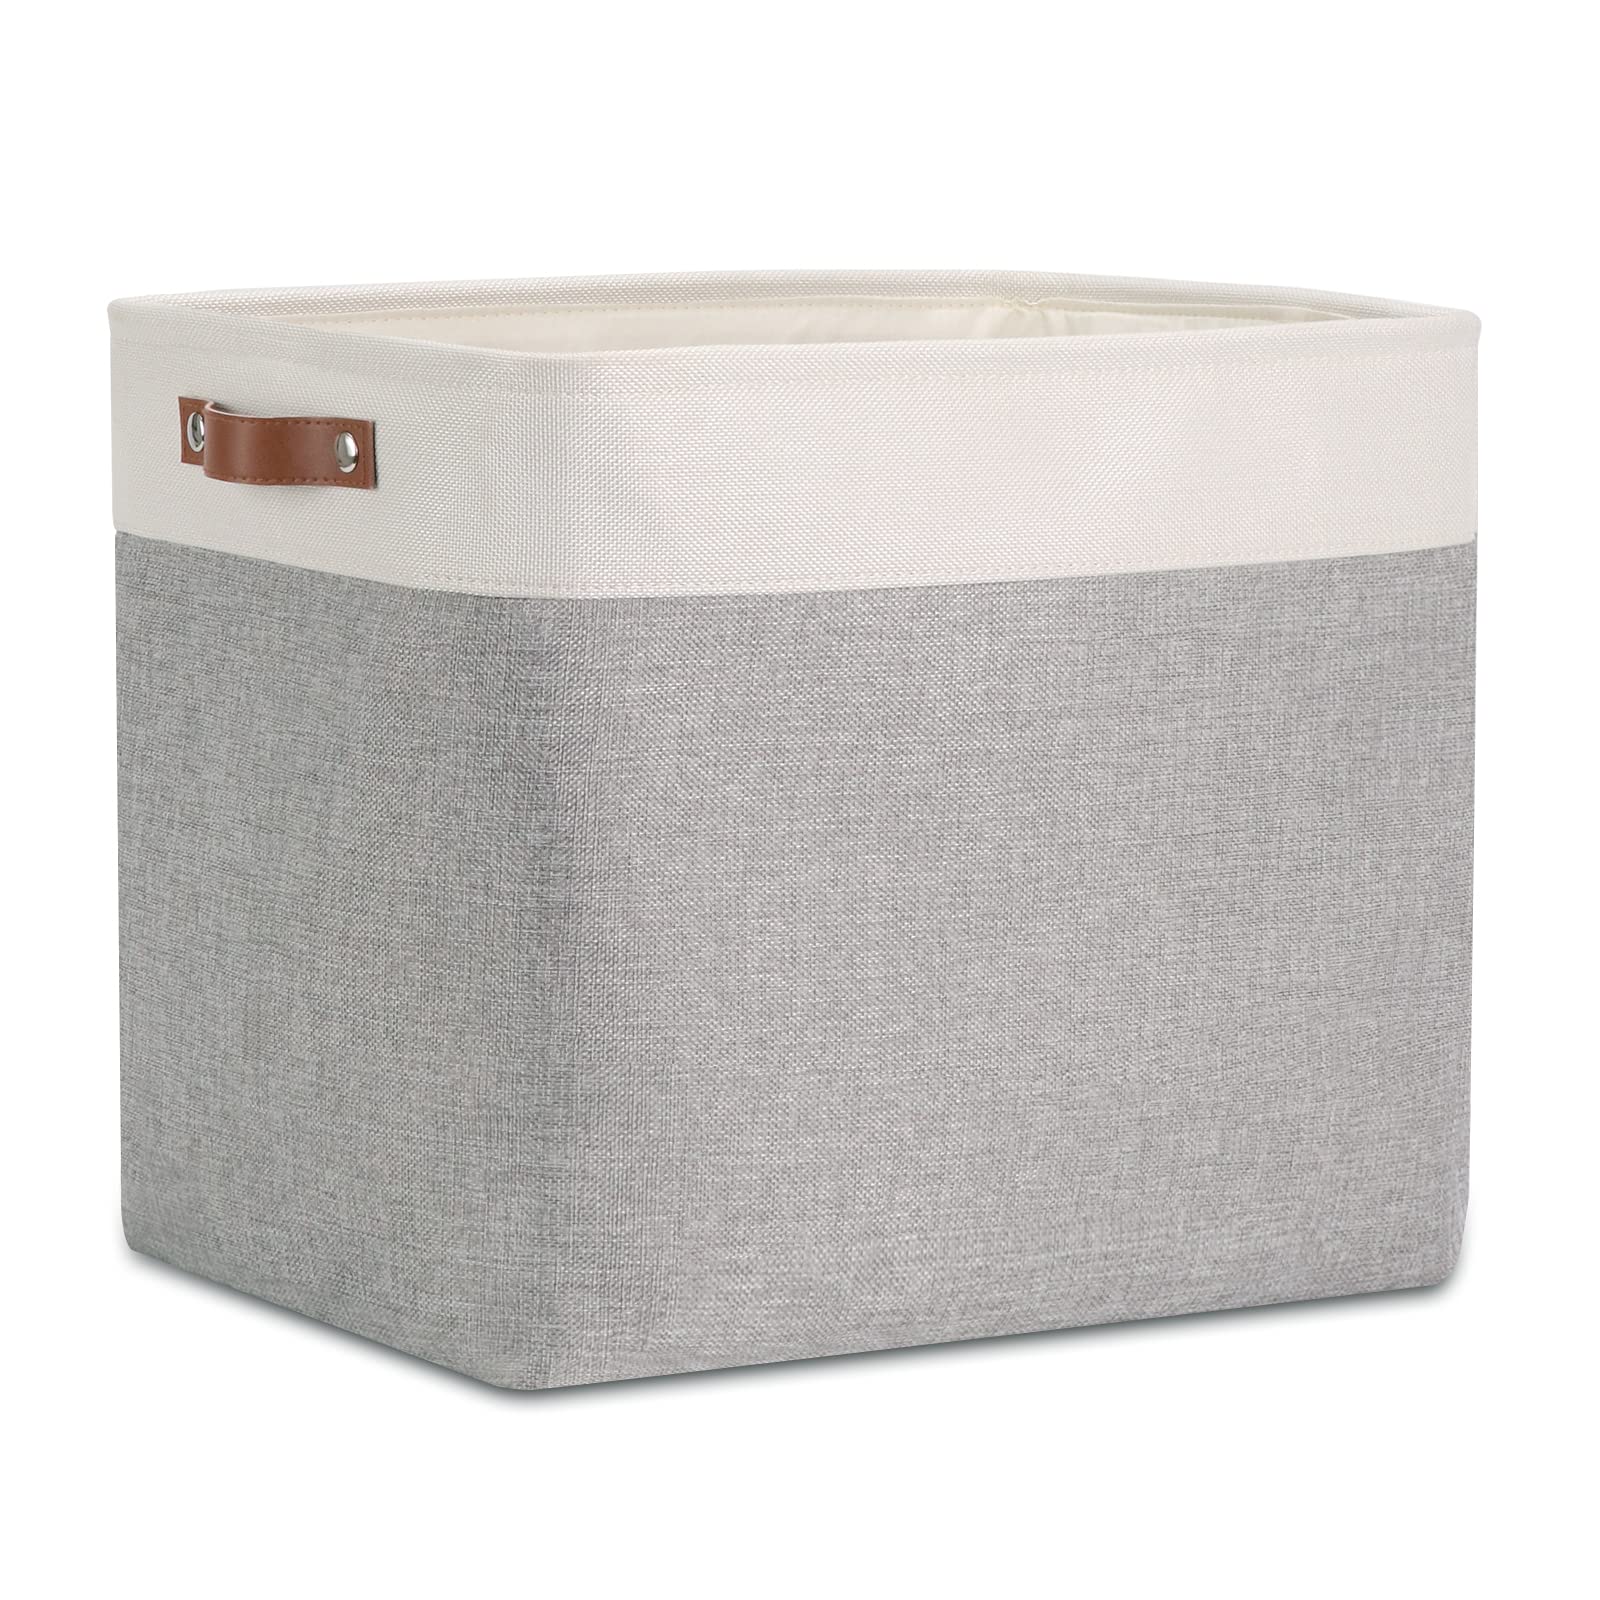 Large Fabric Storage Baskets with Leather Handles Canvas Bin Modern Home Decor